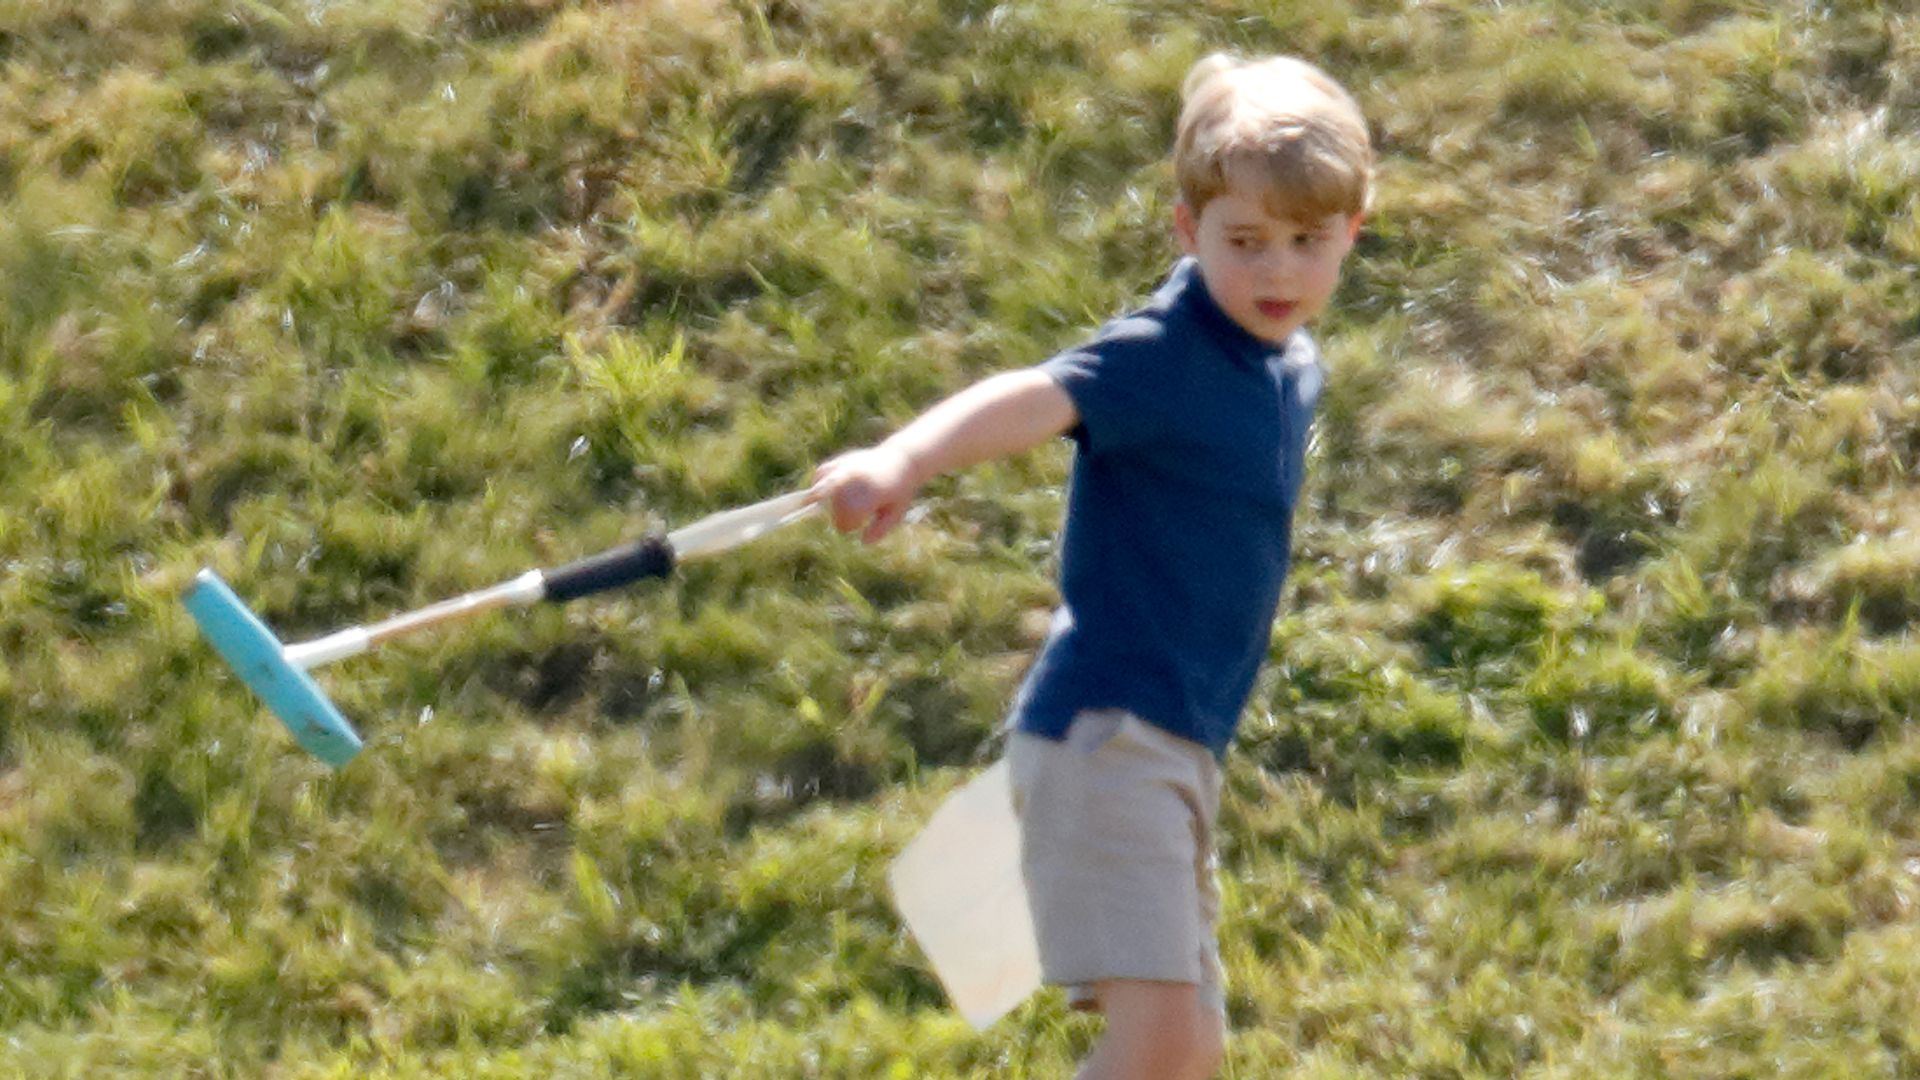 Prince George with a polo mallet